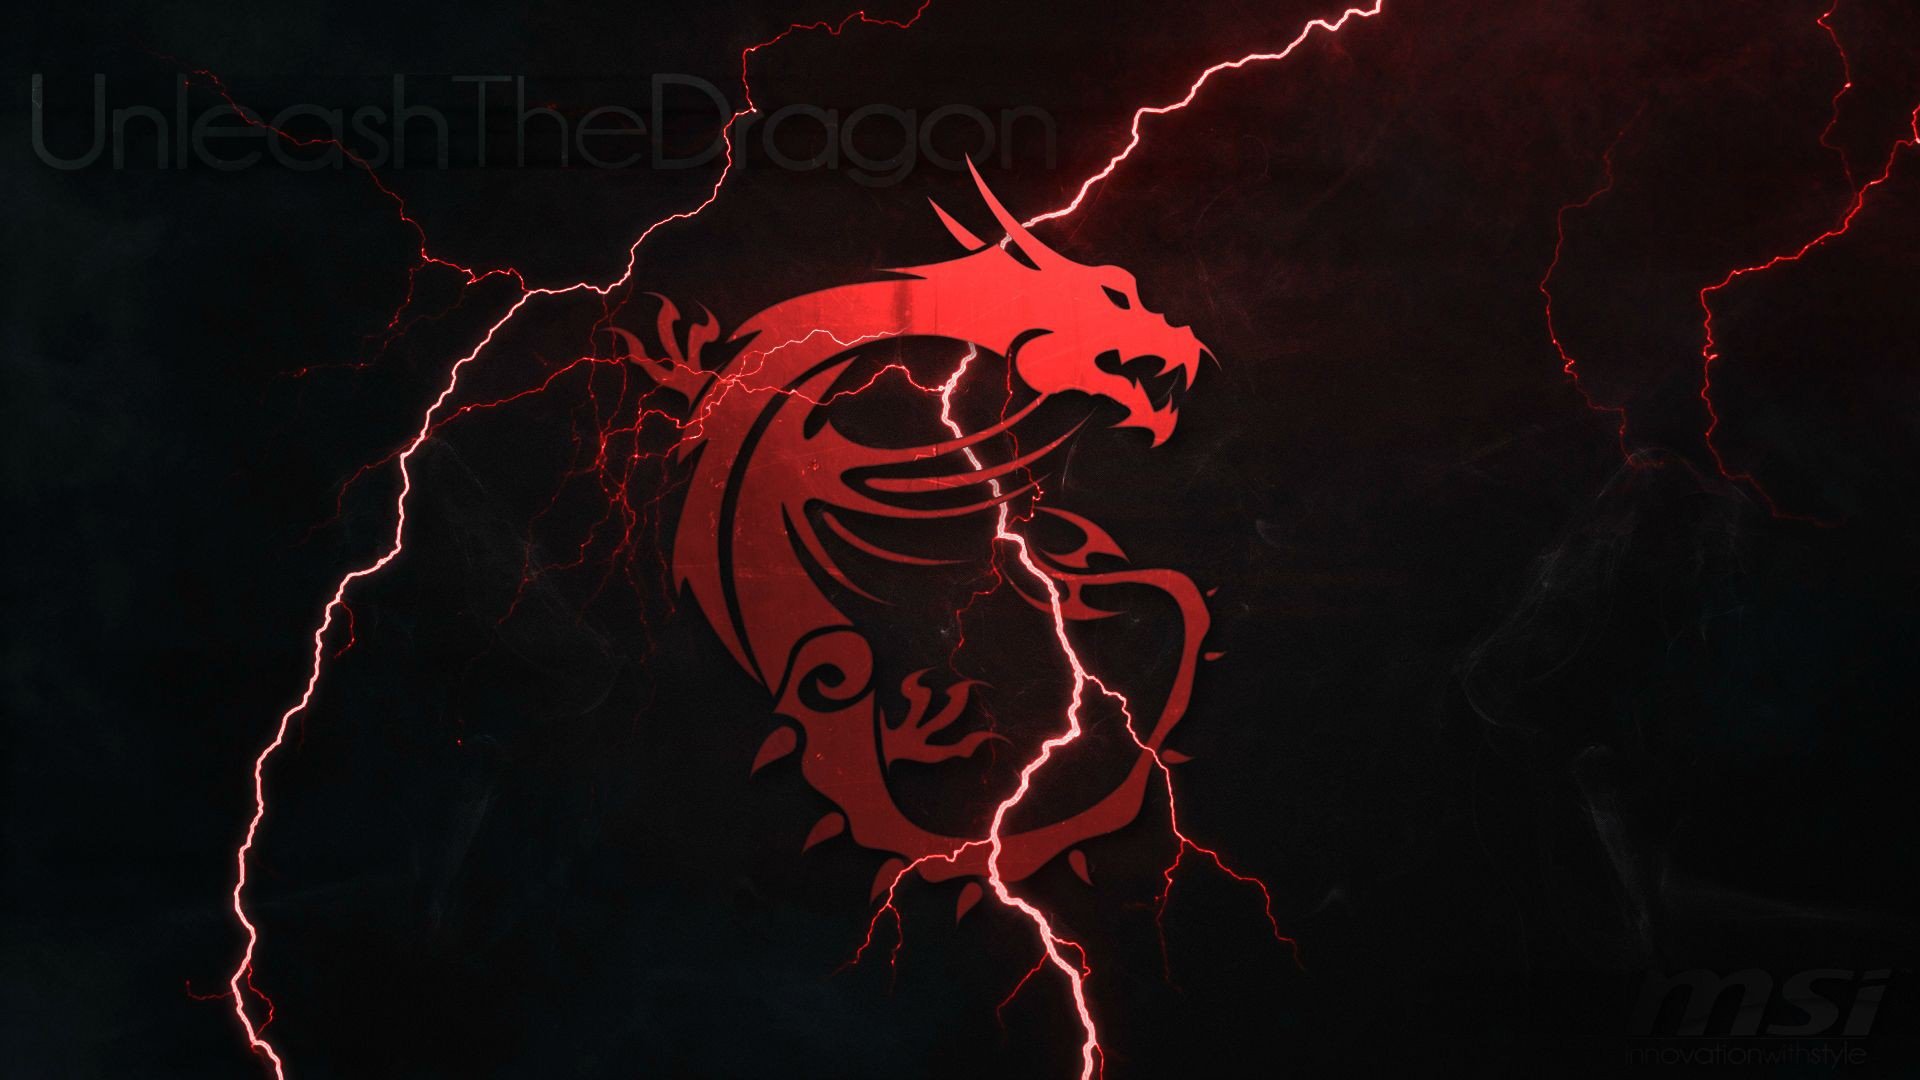 msi logo red dragon hd 1920x1080 1080p wallpaper compatible for 1920x1080